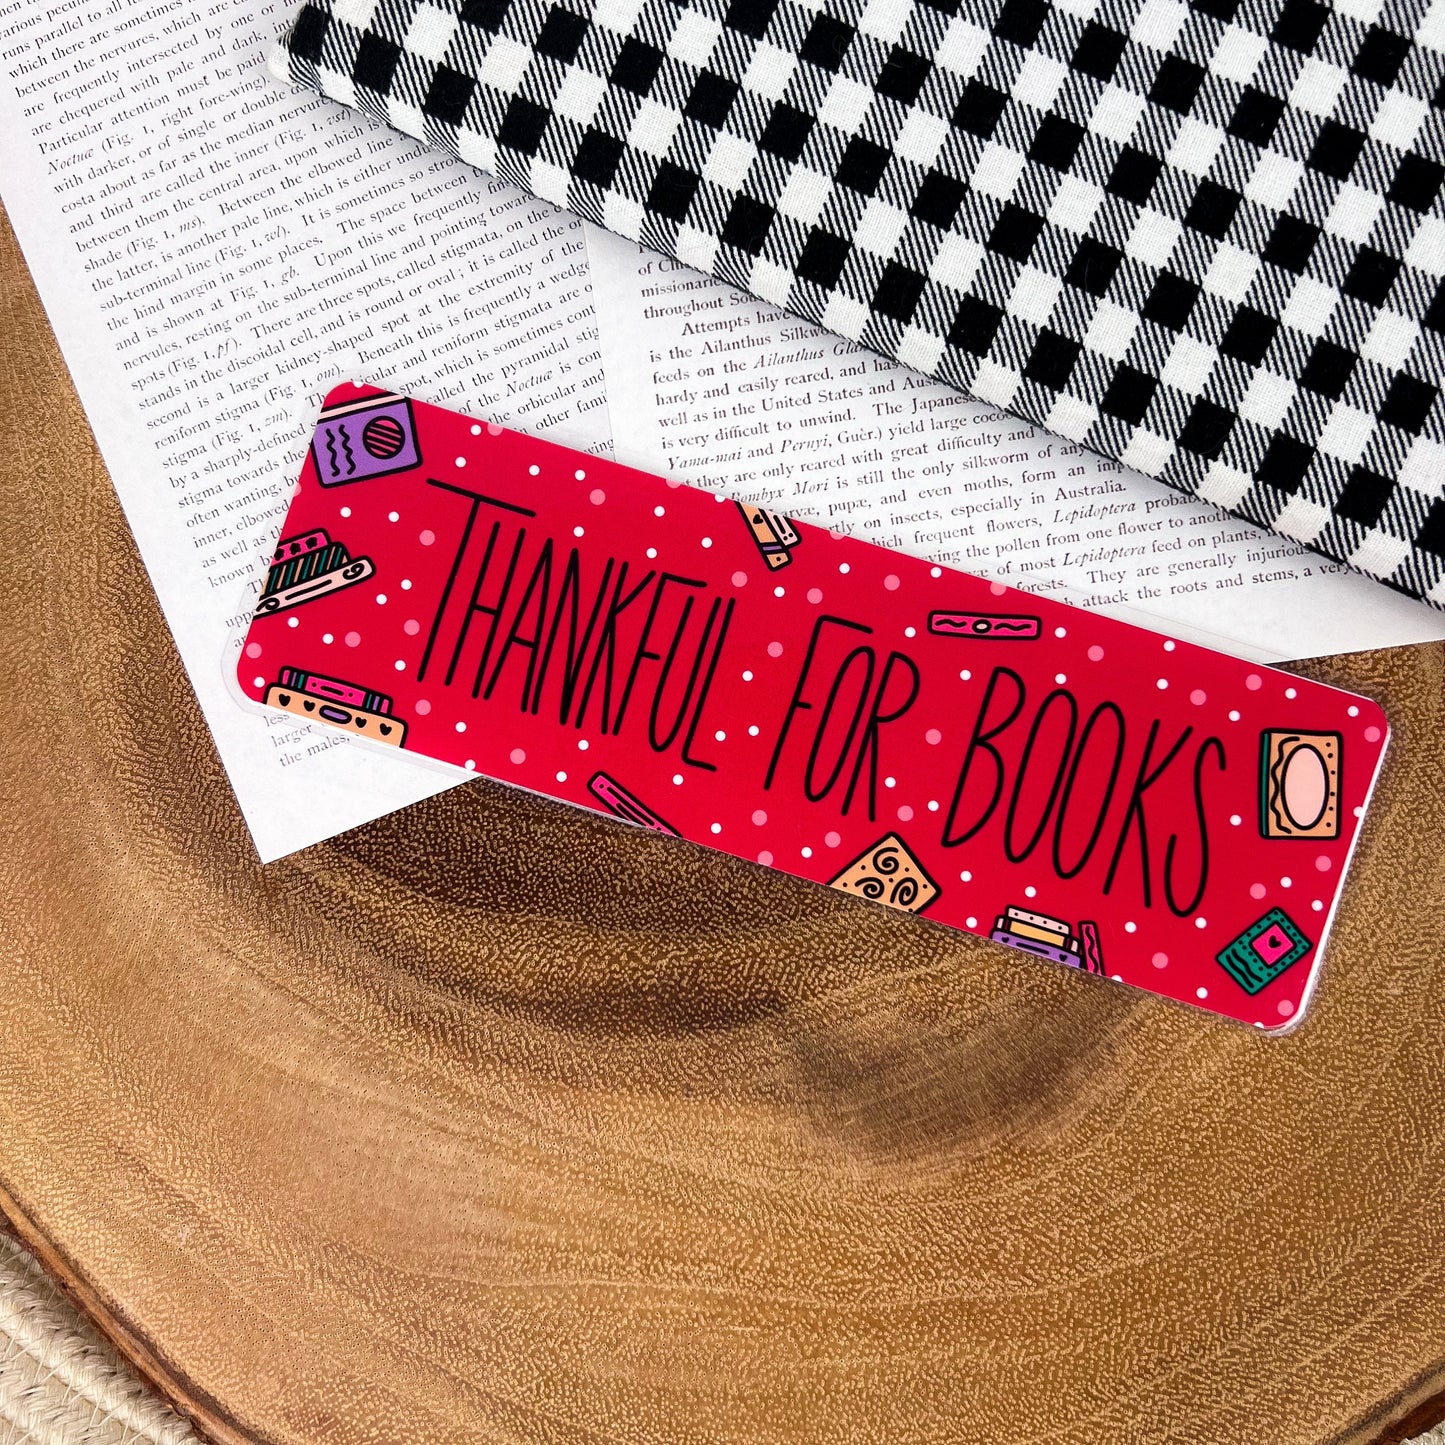 Thankful For Books Bookmark